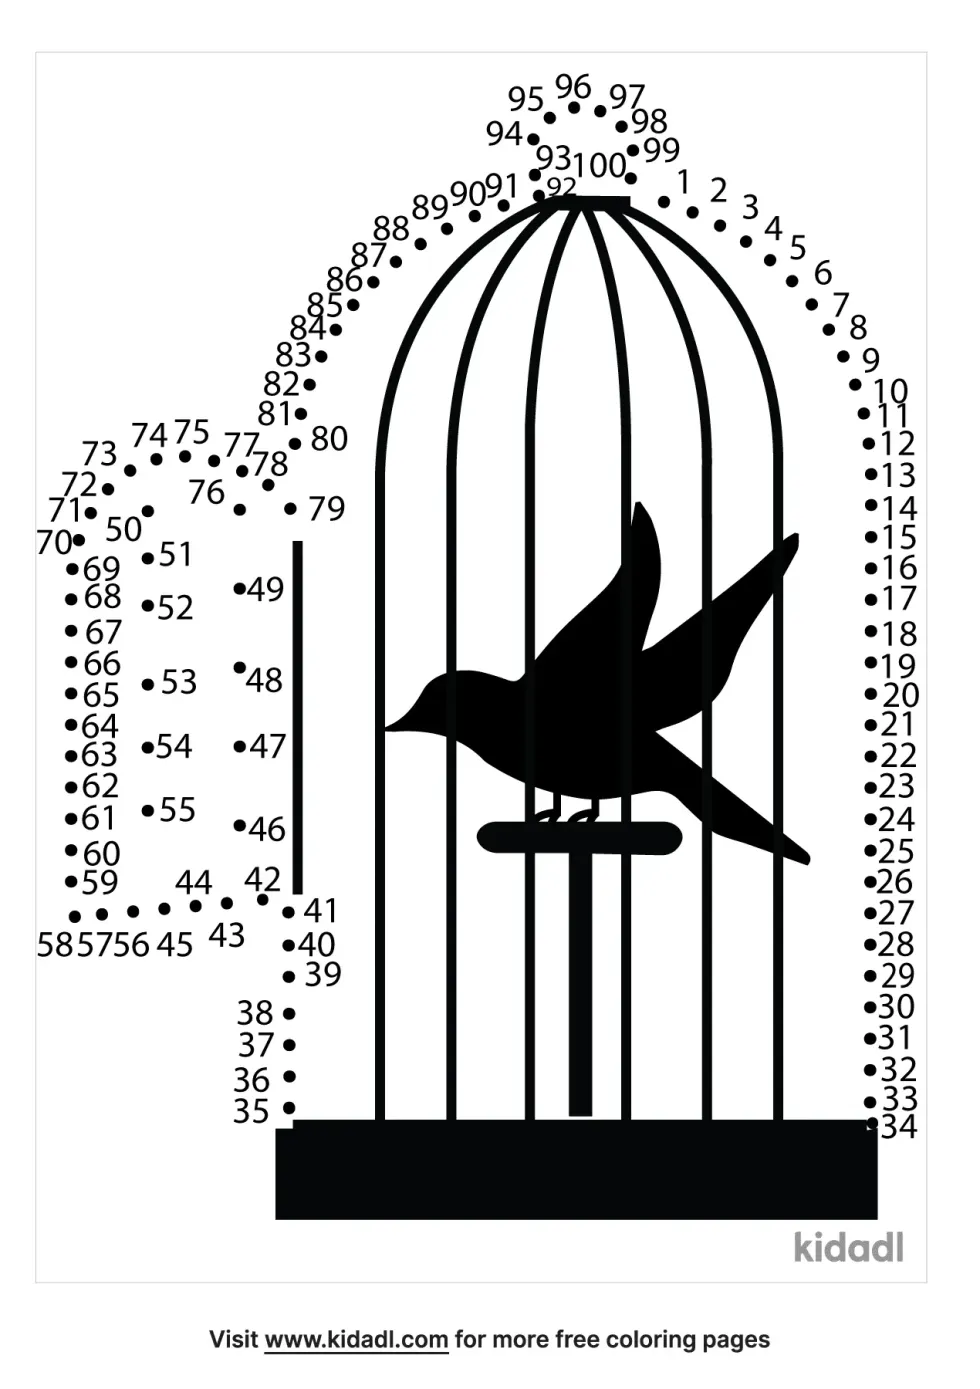 Bird In A Cage